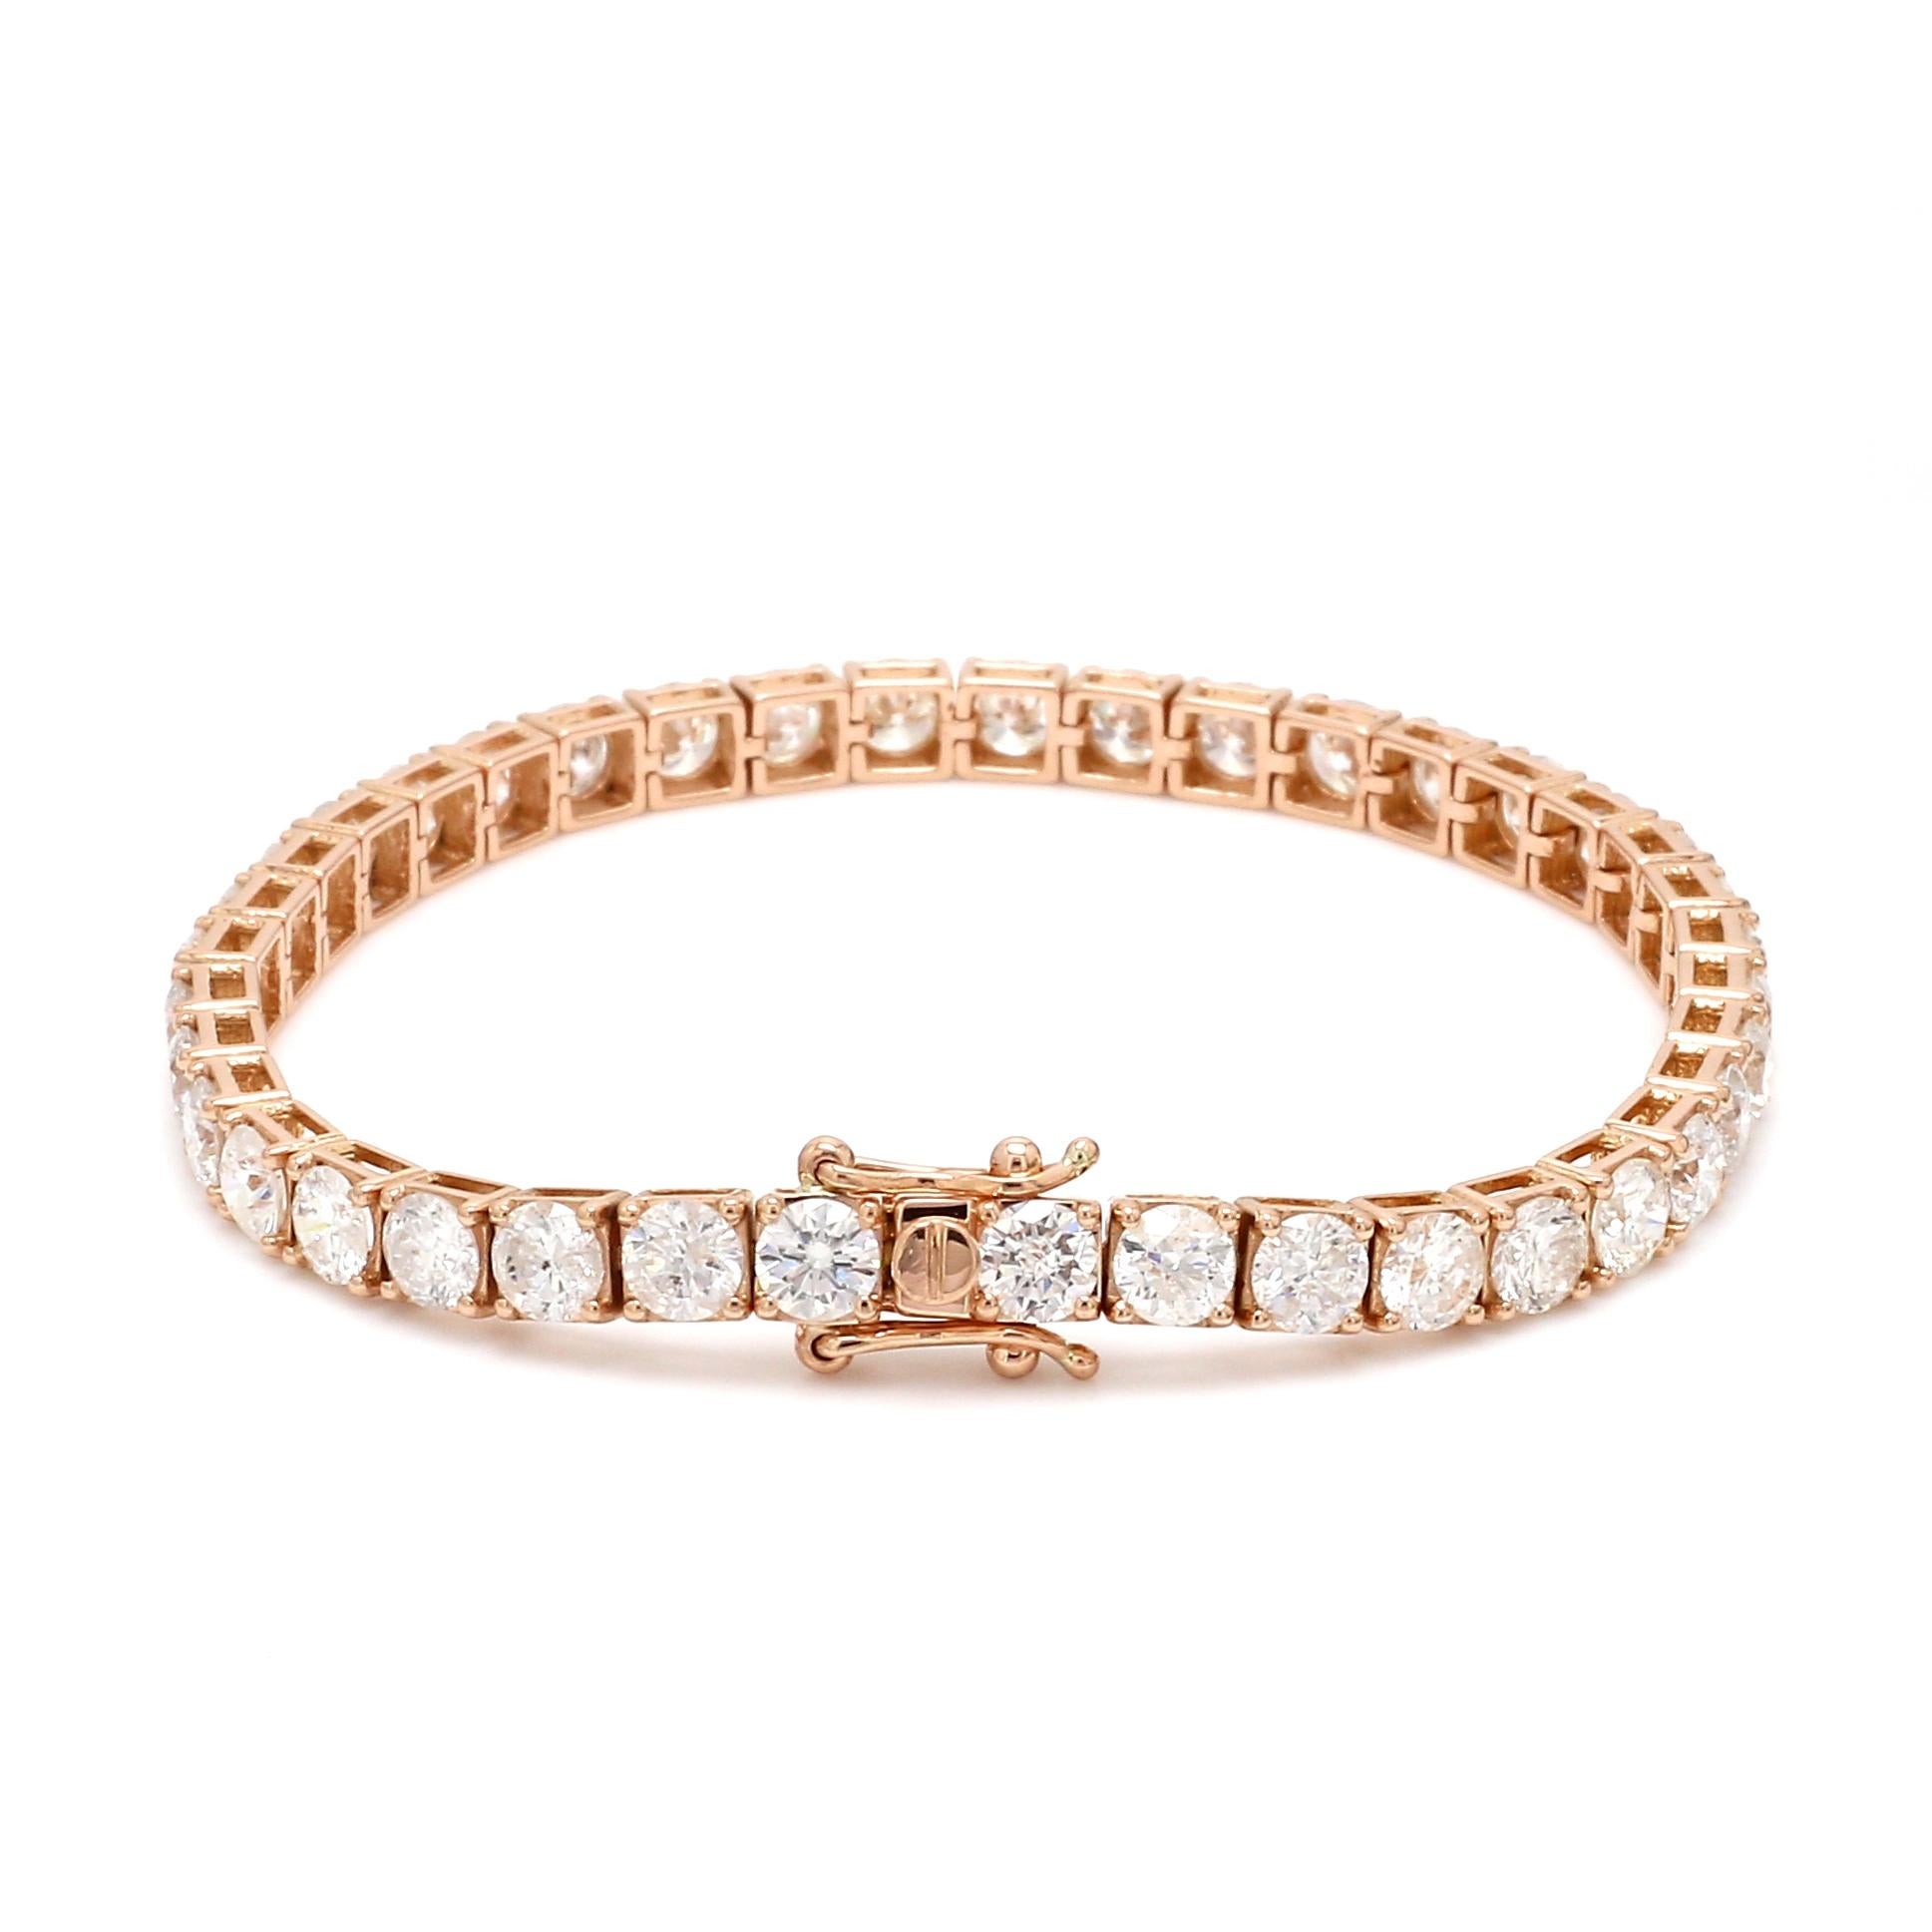 Item Code :- CN-24929
Gross Wt. :- 15.58 gm
18k Rose Gold Wt. :- 13.23 gm
Diamond Wt. :- 11.75 Ct. ( AVERAGE DIAMOND CLARITY SI1-SI2 & COLOR H-I )
Bracelet Length :- 7 Inches Long
✦ Sizing
.....................
We can adjust most items to fit your